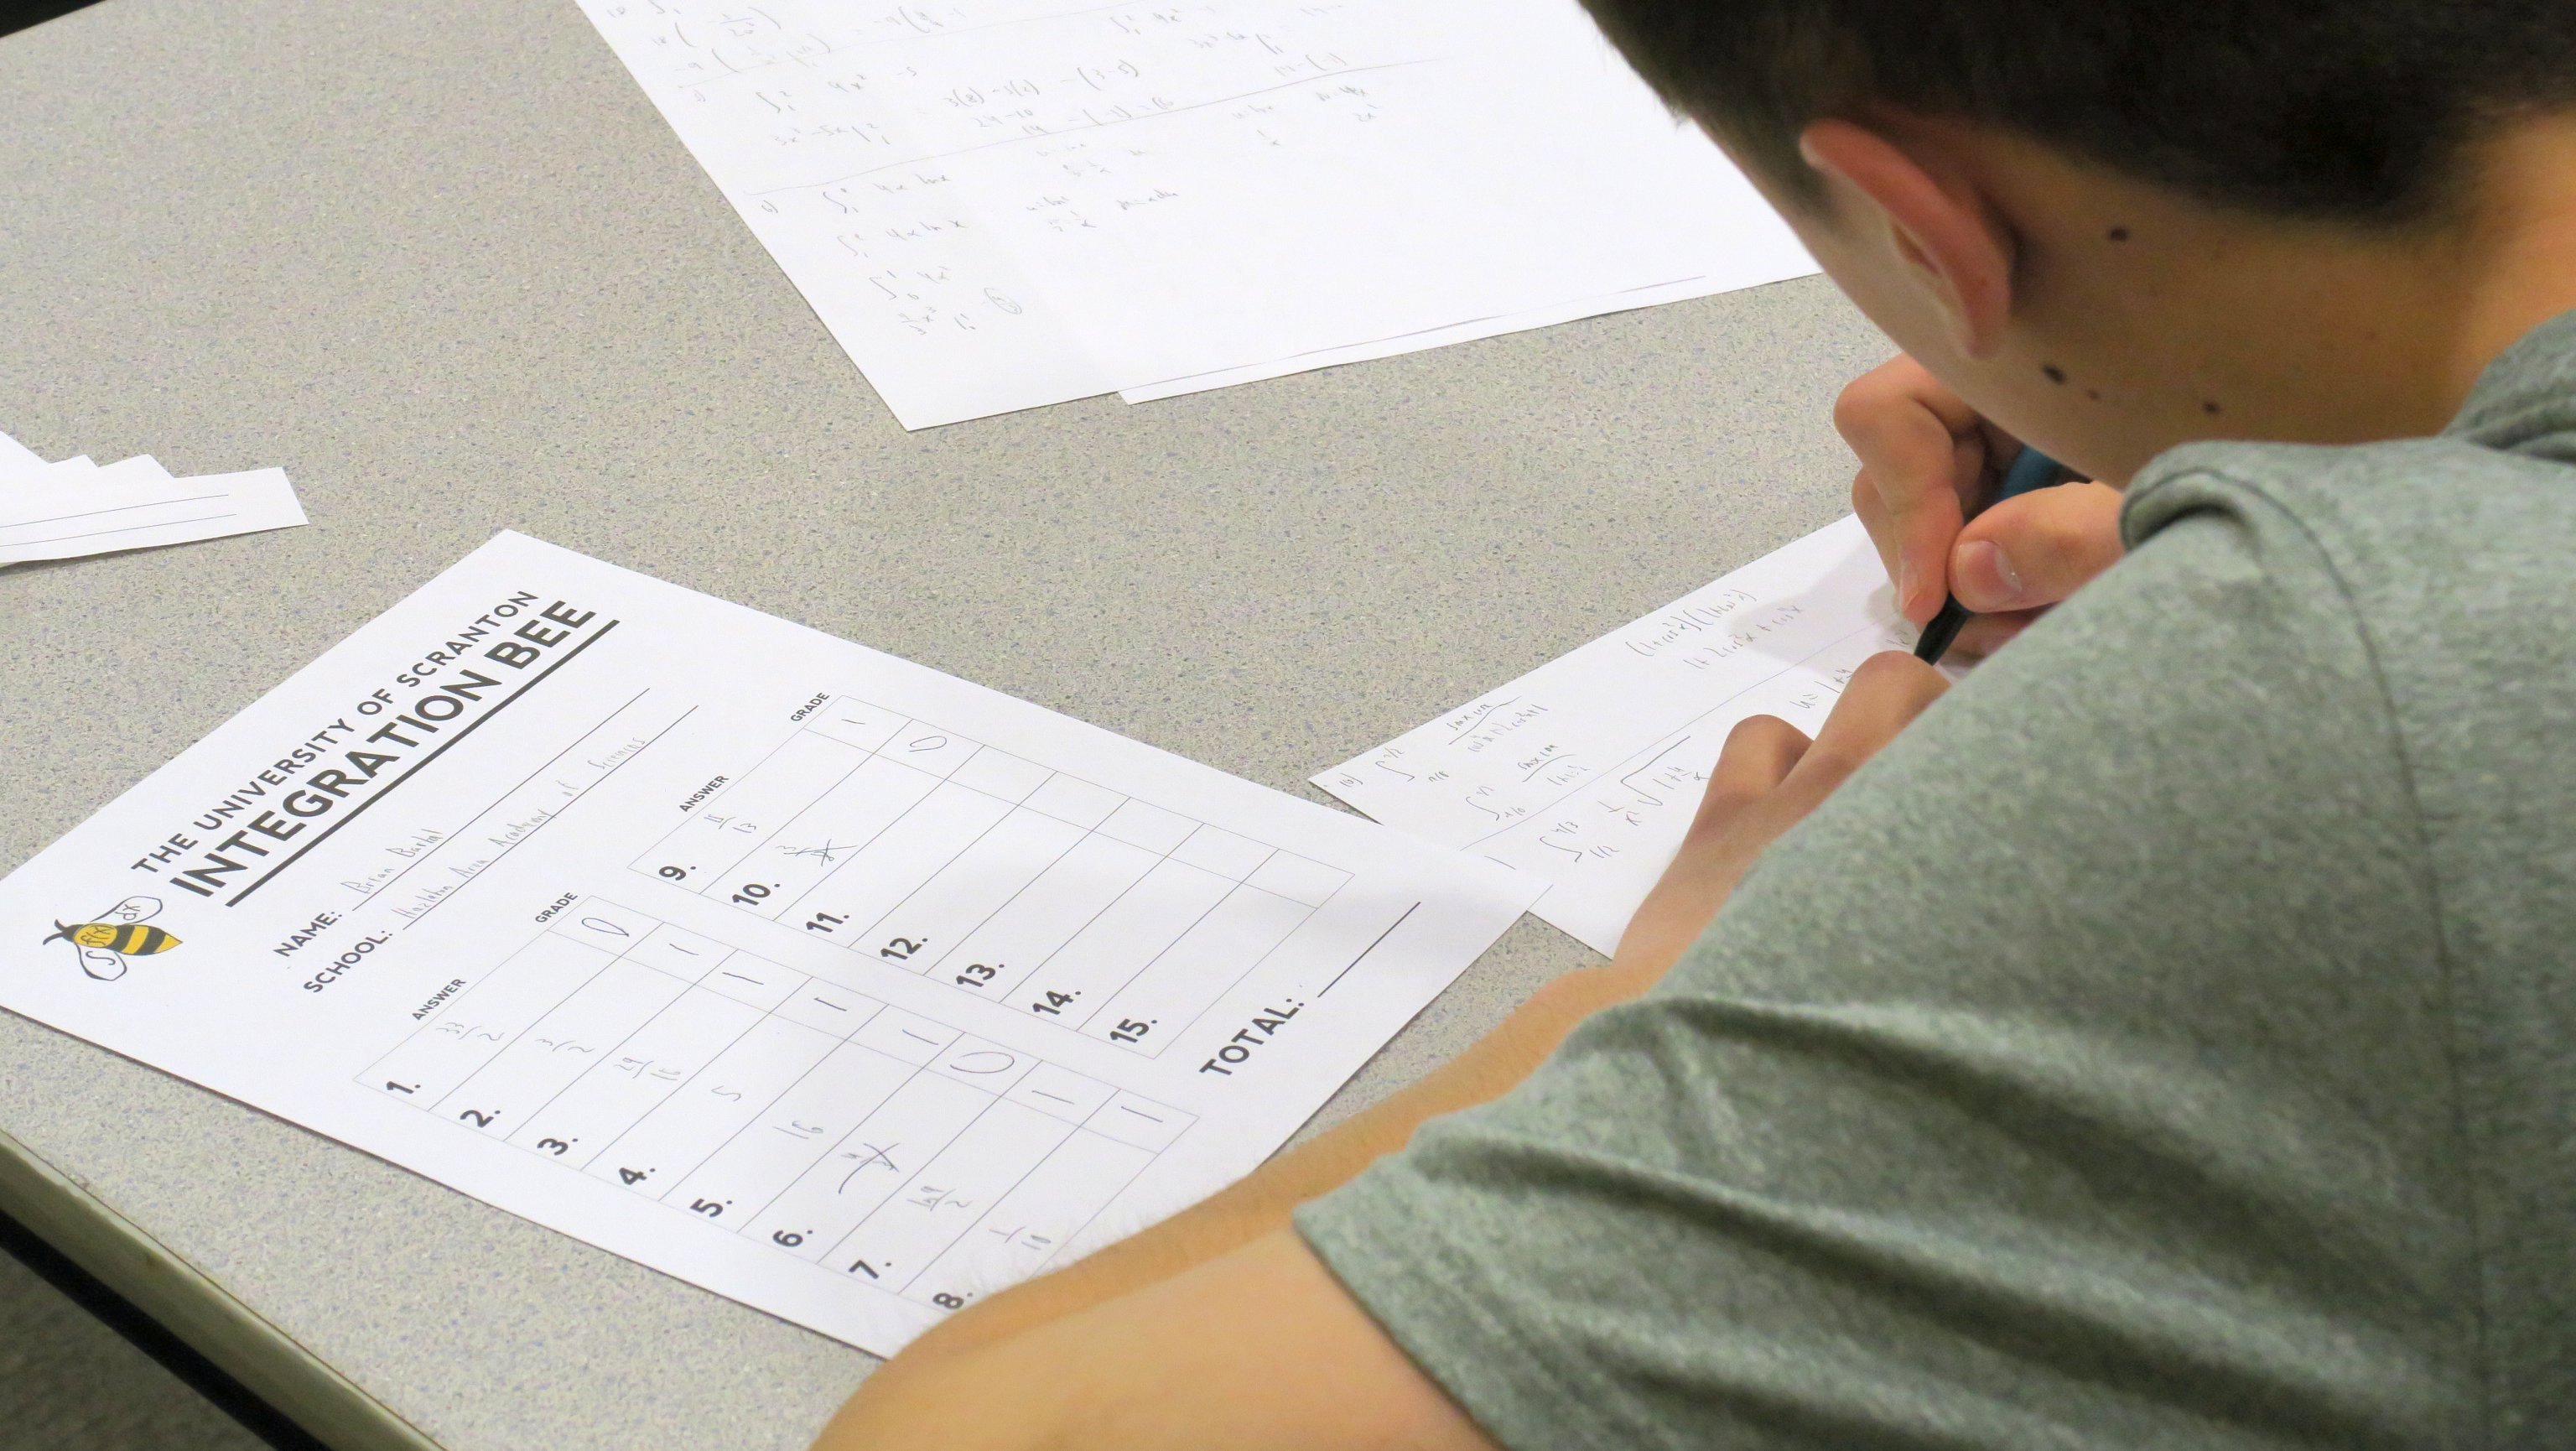 A Hazelton Area Academy of Sciences student solving a definite integral by substitution during the 2019 Integration Bee